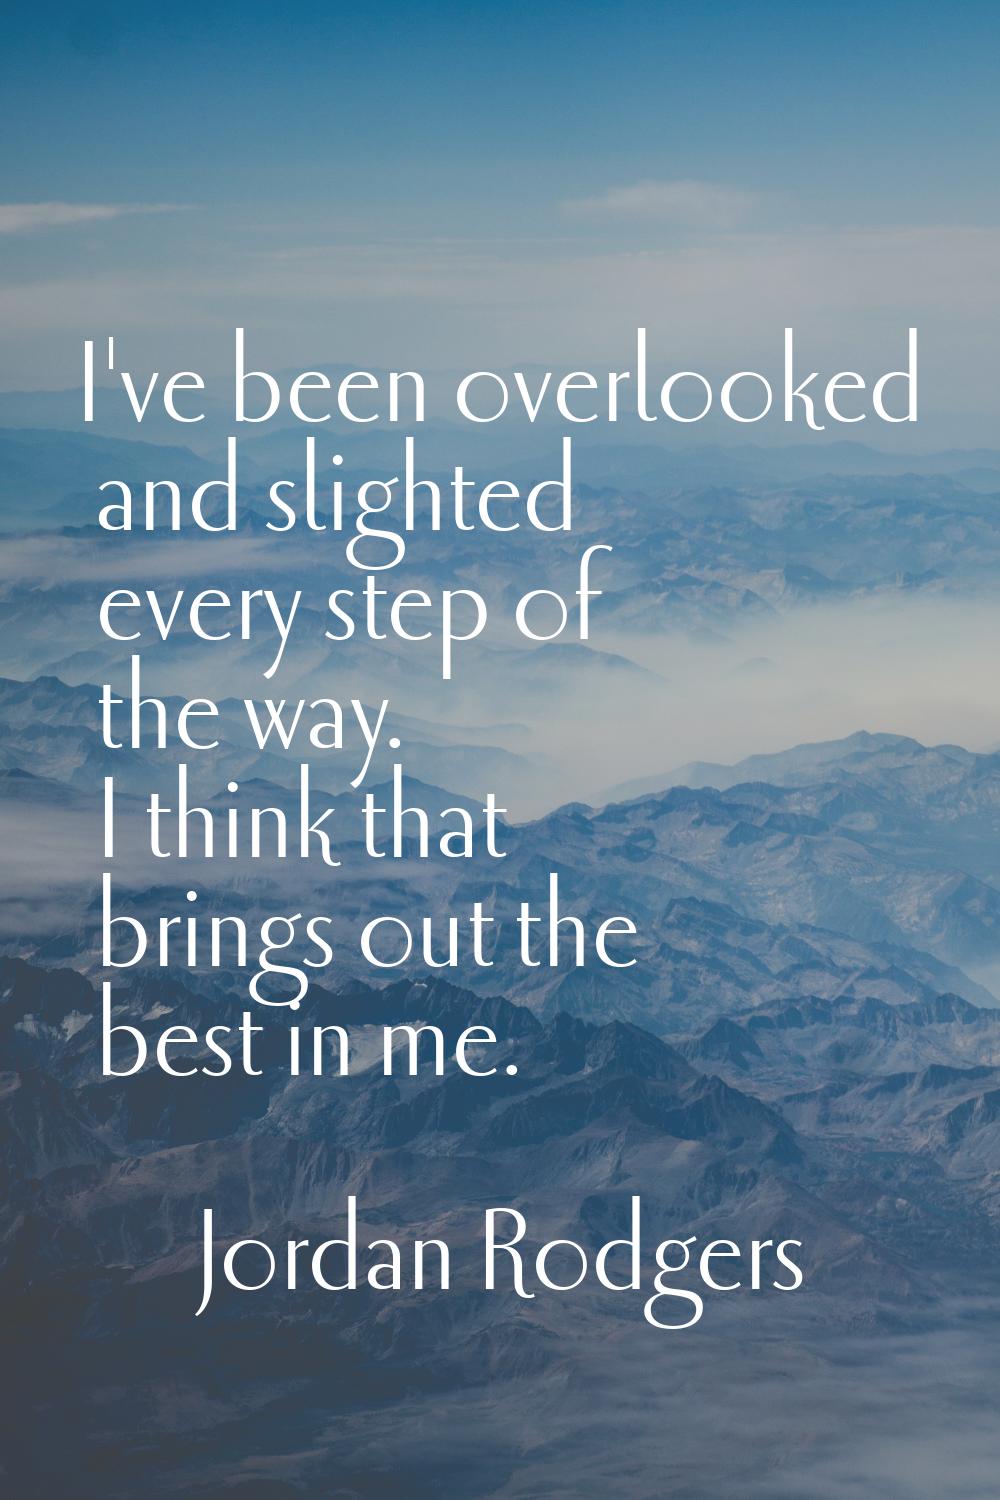 I've been overlooked and slighted every step of the way. I think that brings out the best in me.